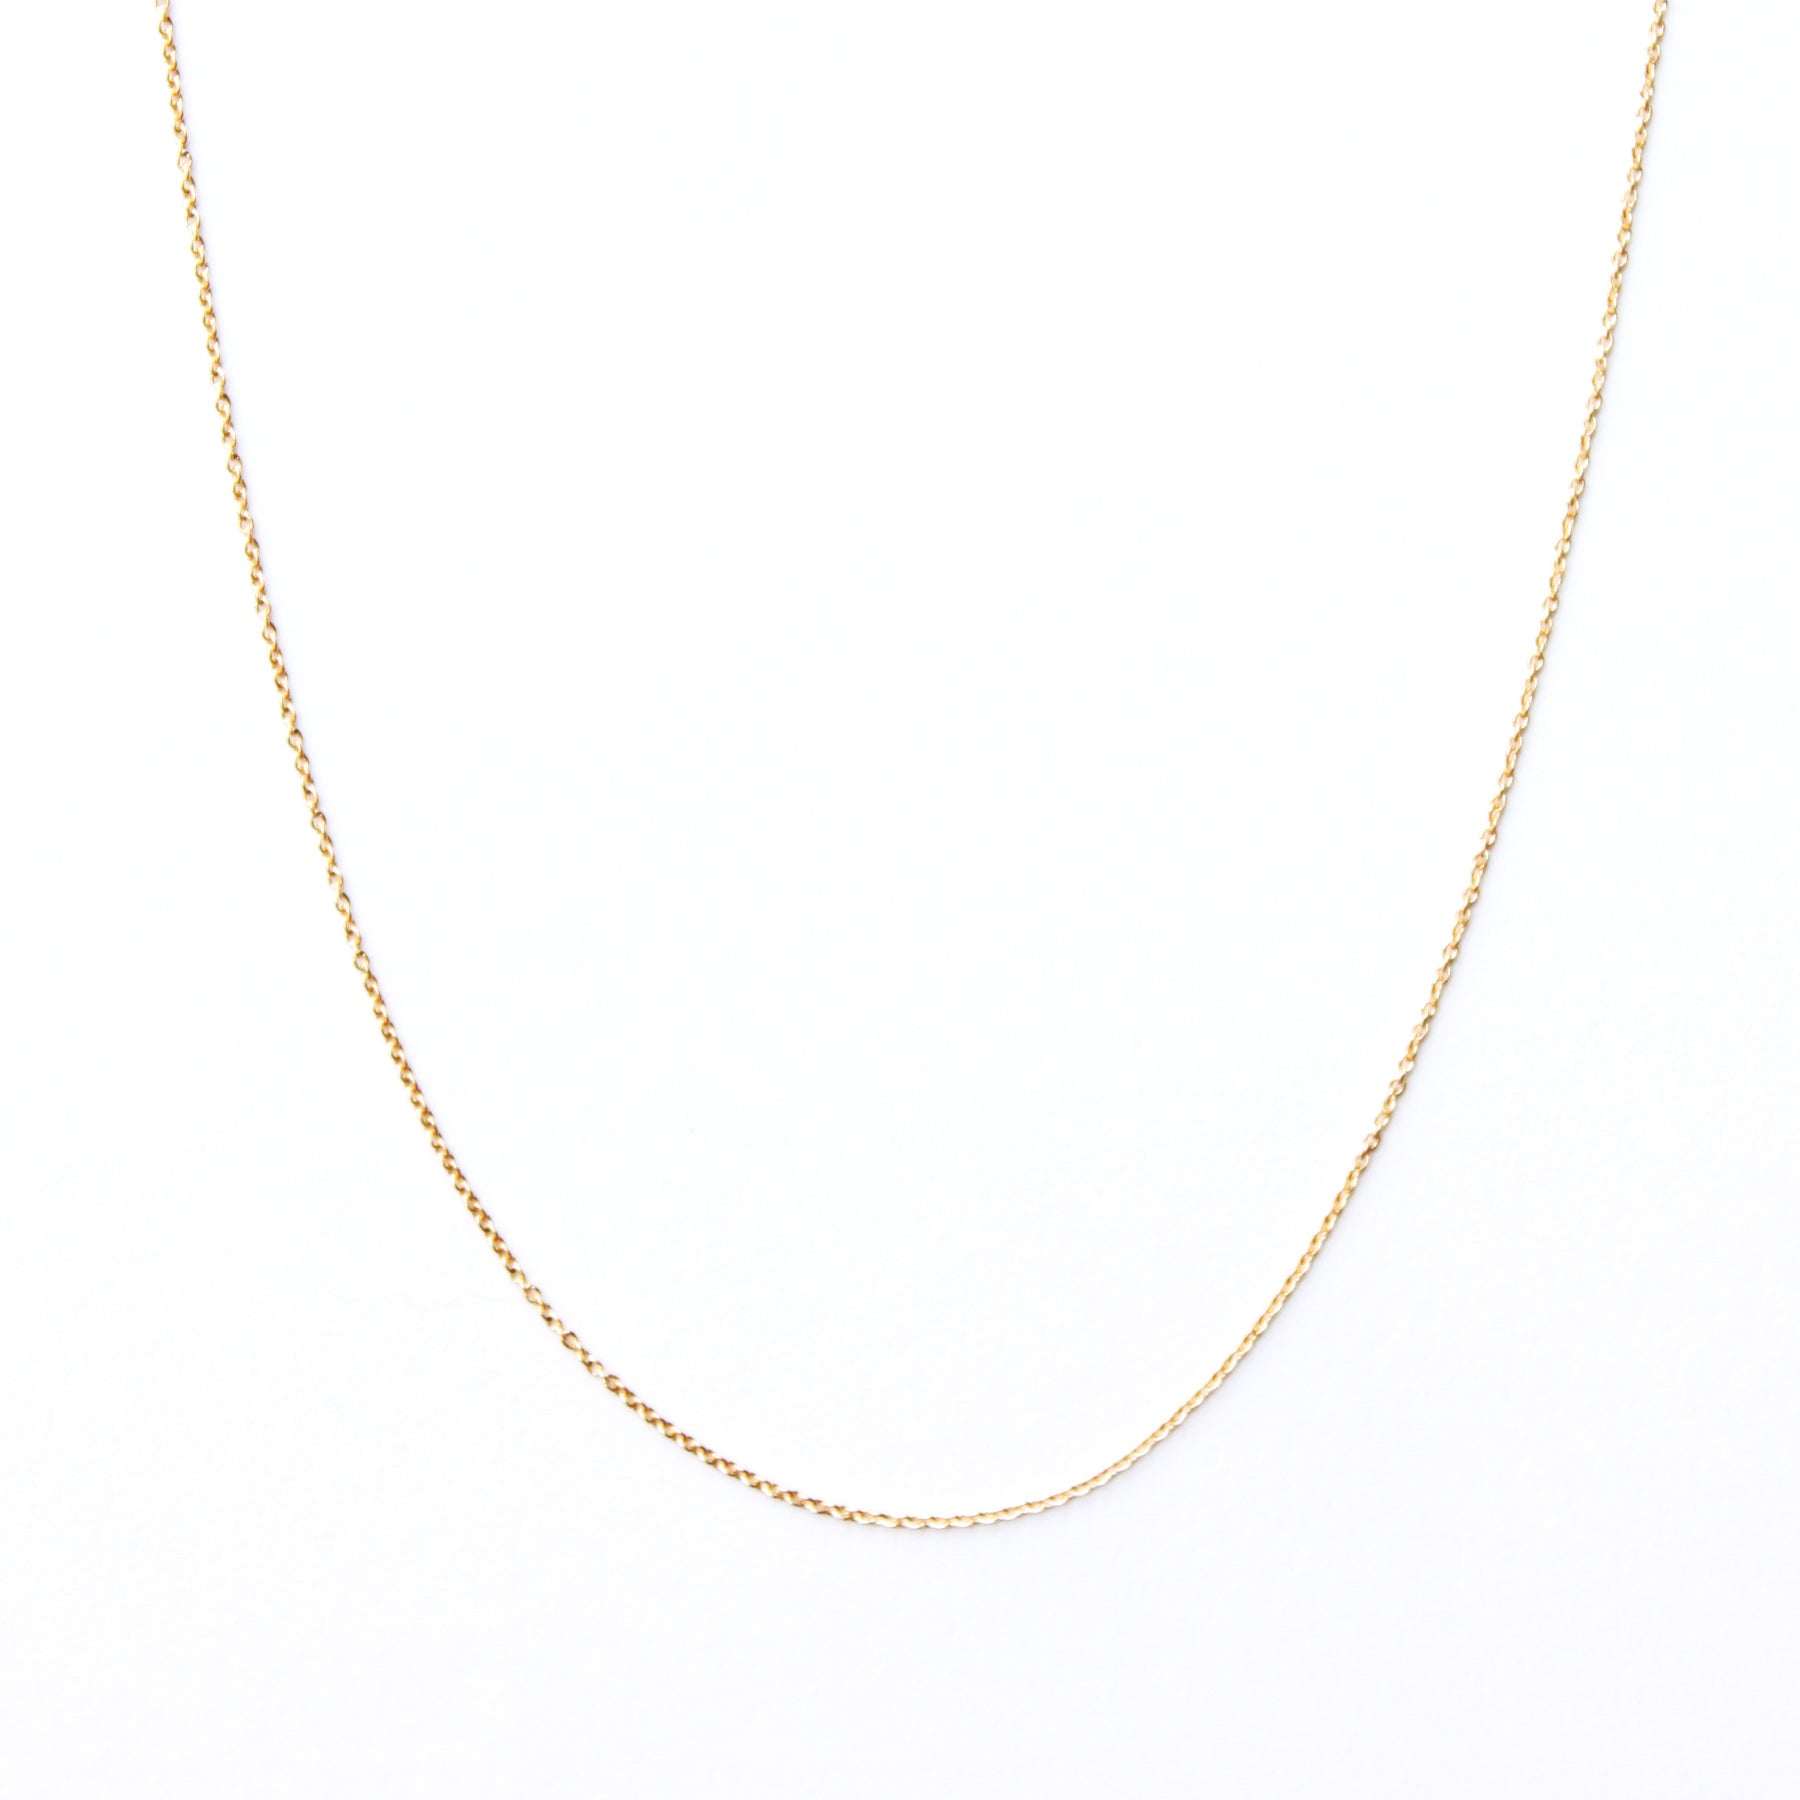 14k solid gold futures plain long cable chain